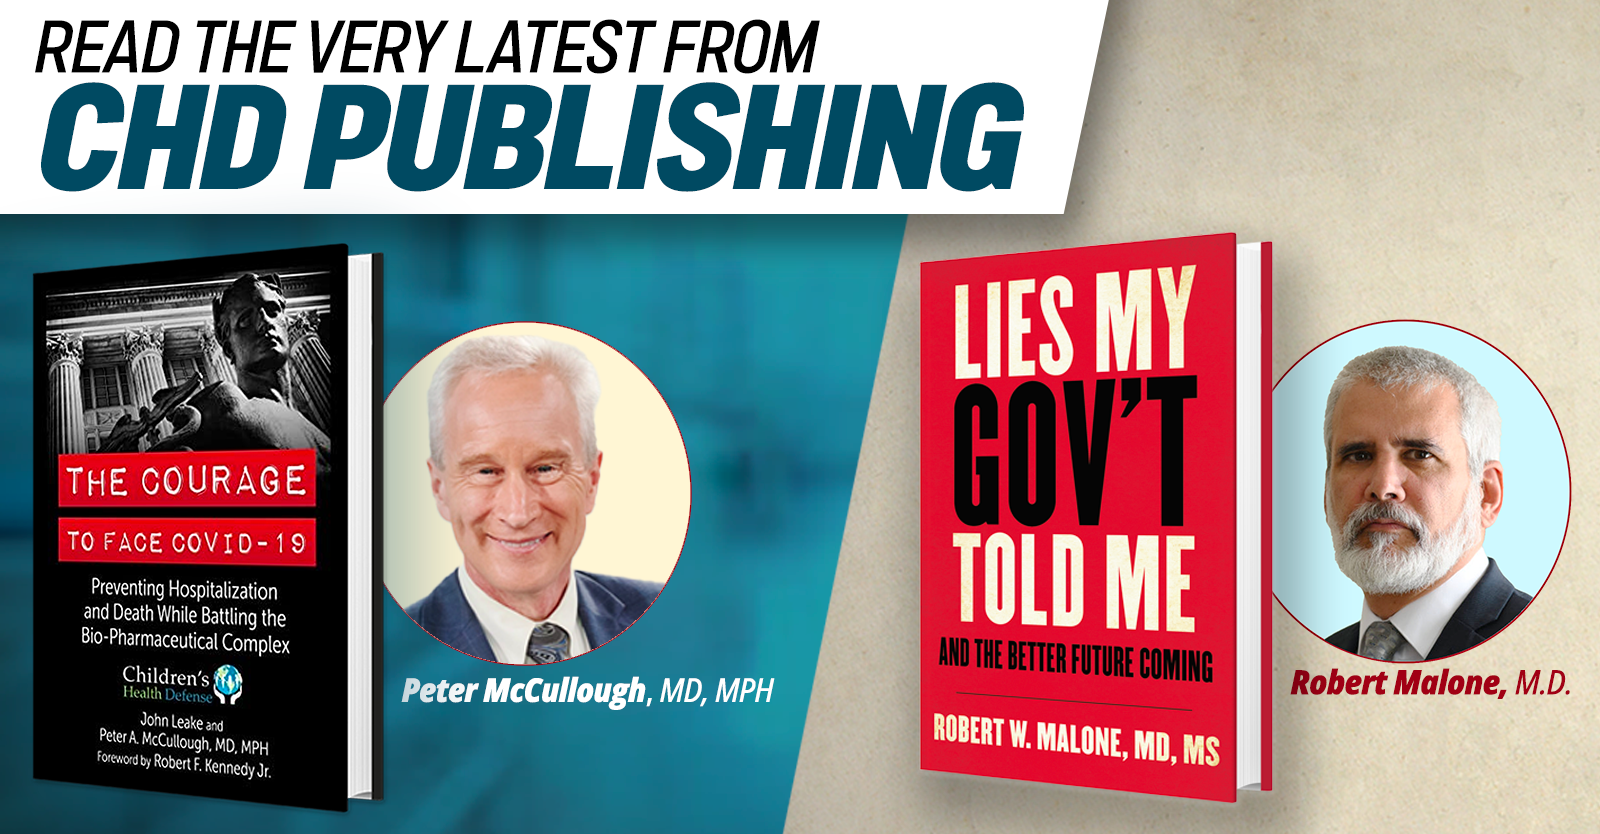 McCullough (left) and Malone (right) with their respective books. Image courtesy of CHD Publishing.